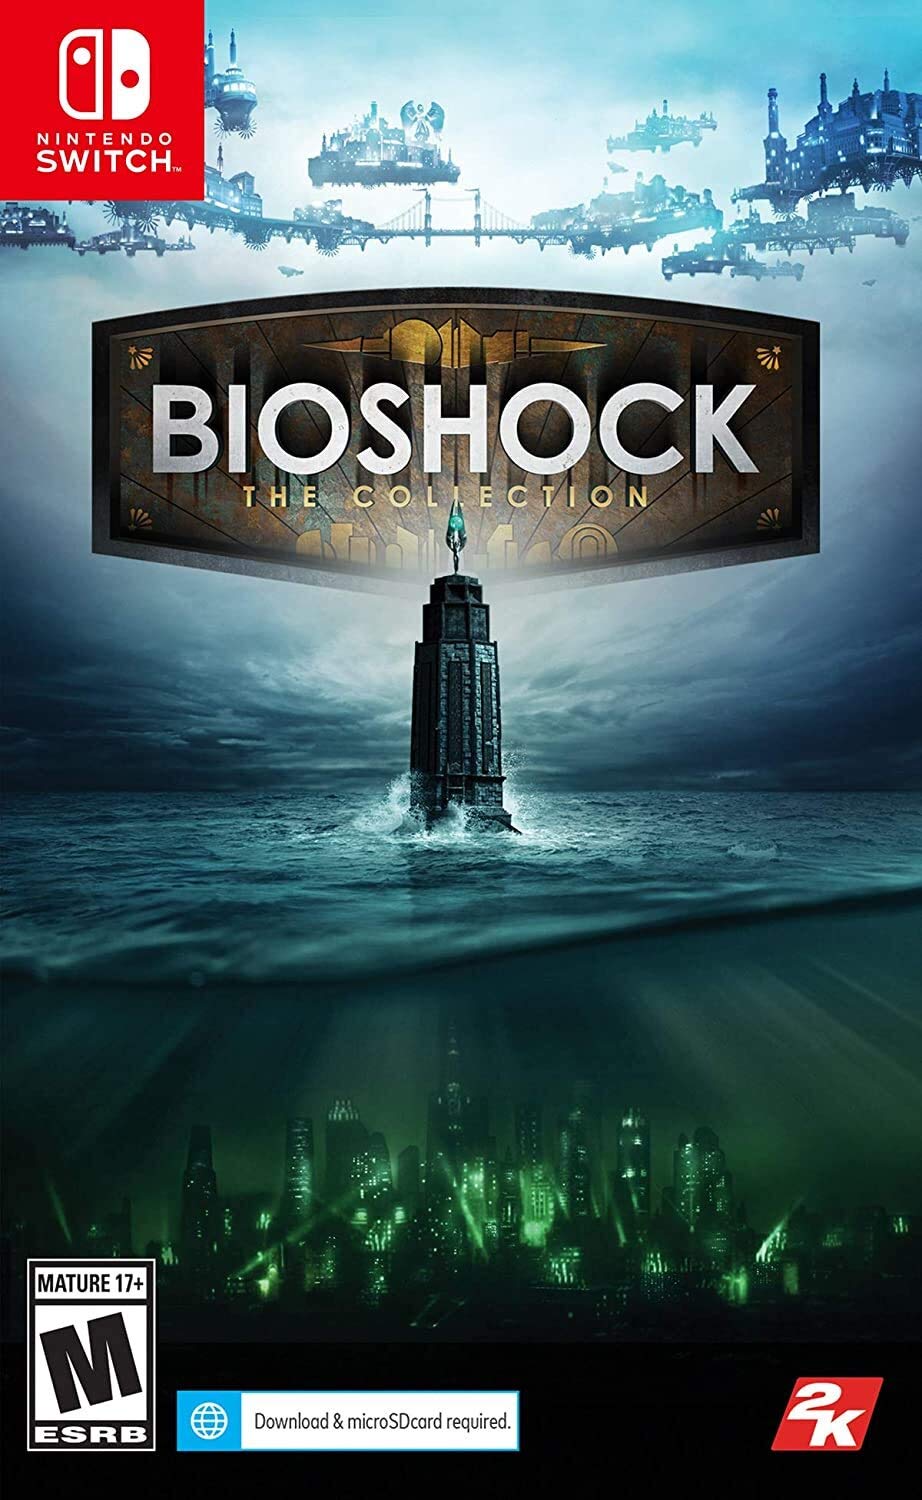 THE BIOSHOCK COLLECTION NSW - Easy Video Game